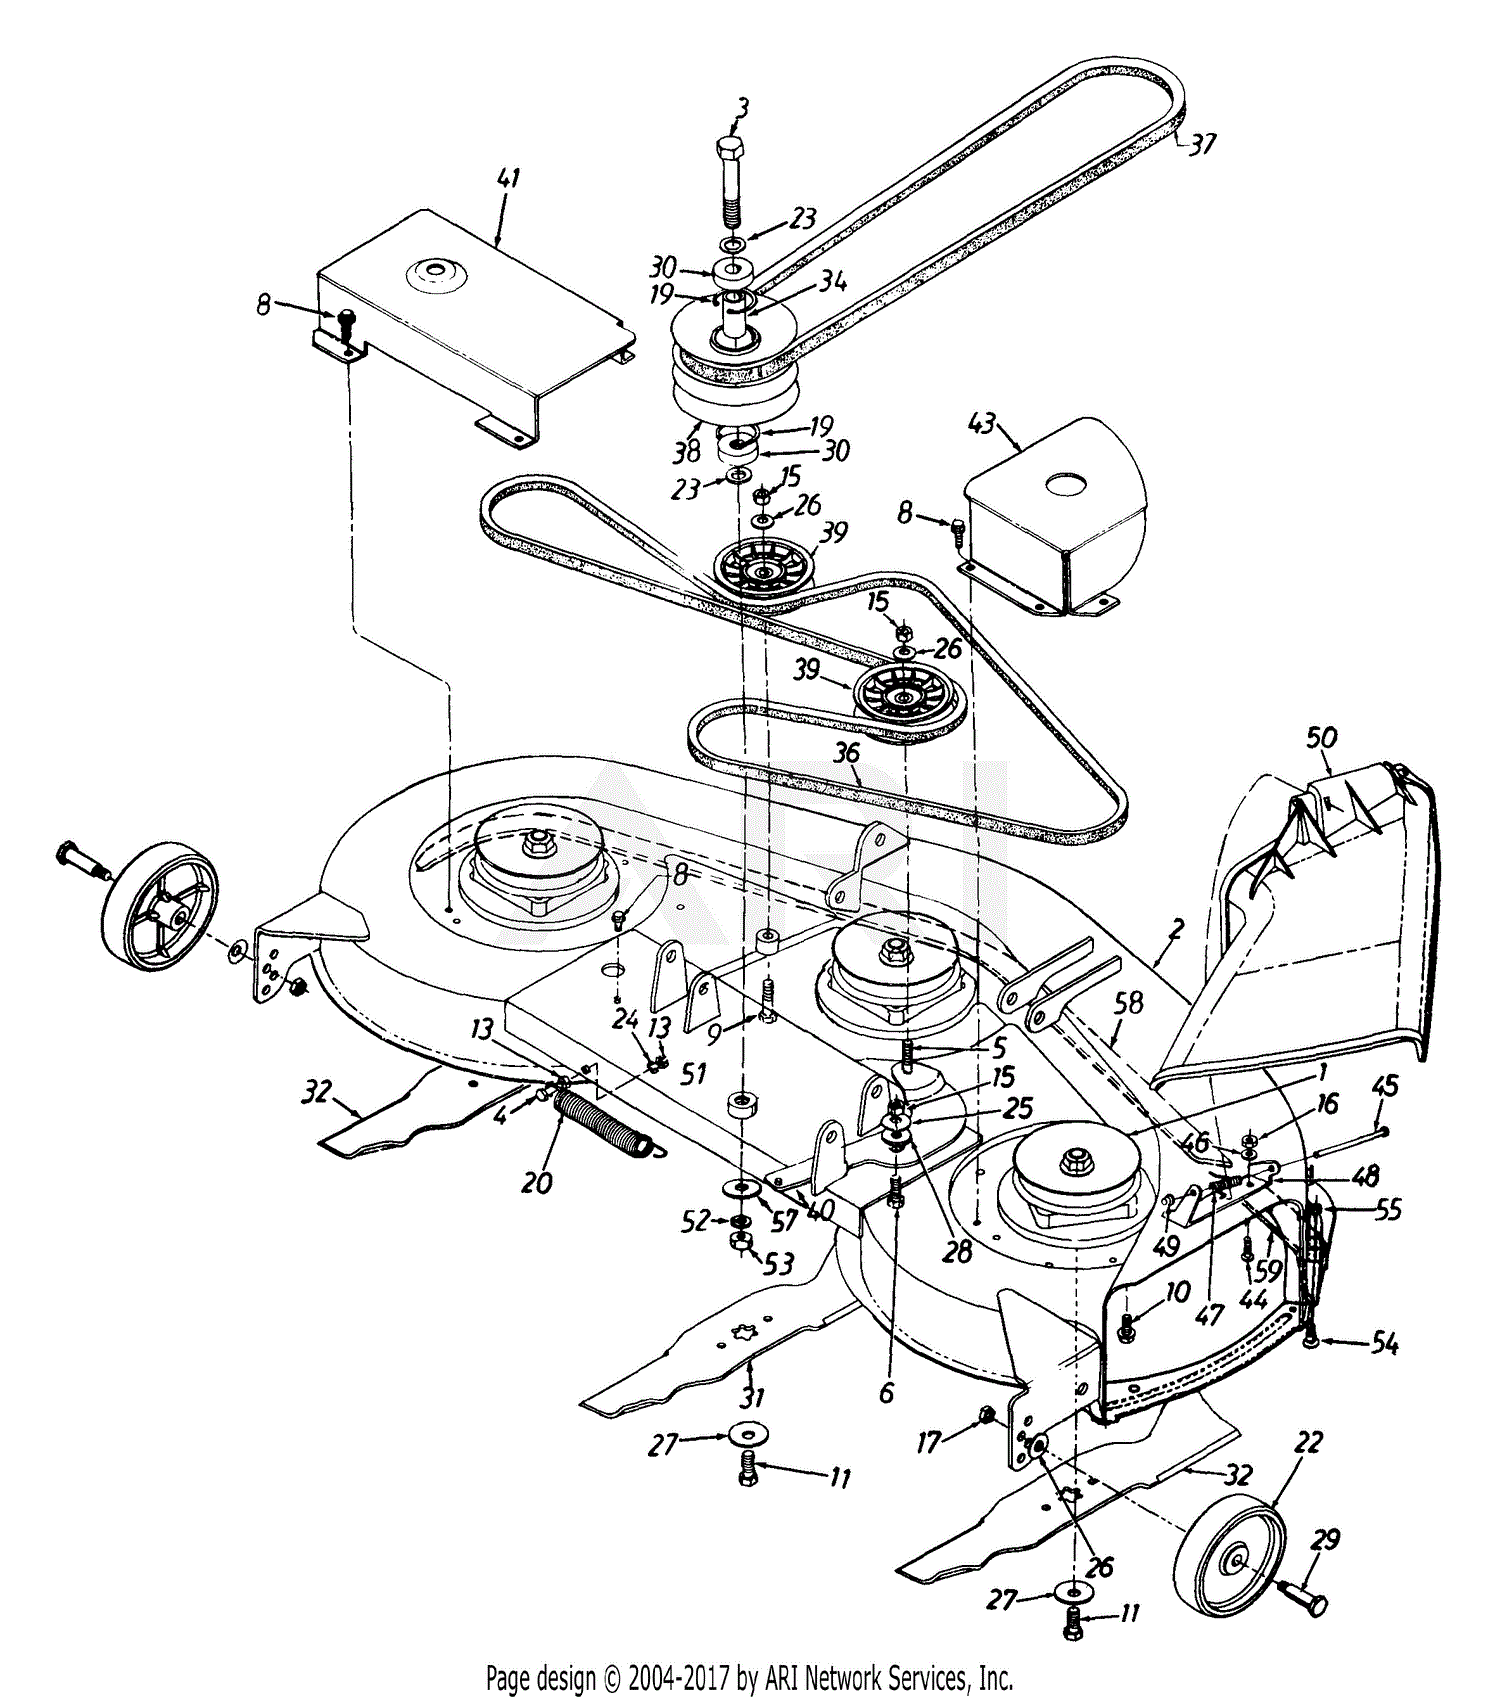 MTD 135T696H190 Lawn Tractor LT-165 (1995) Parts Diagram ... john deere l130 safety switch wiring diagrams 